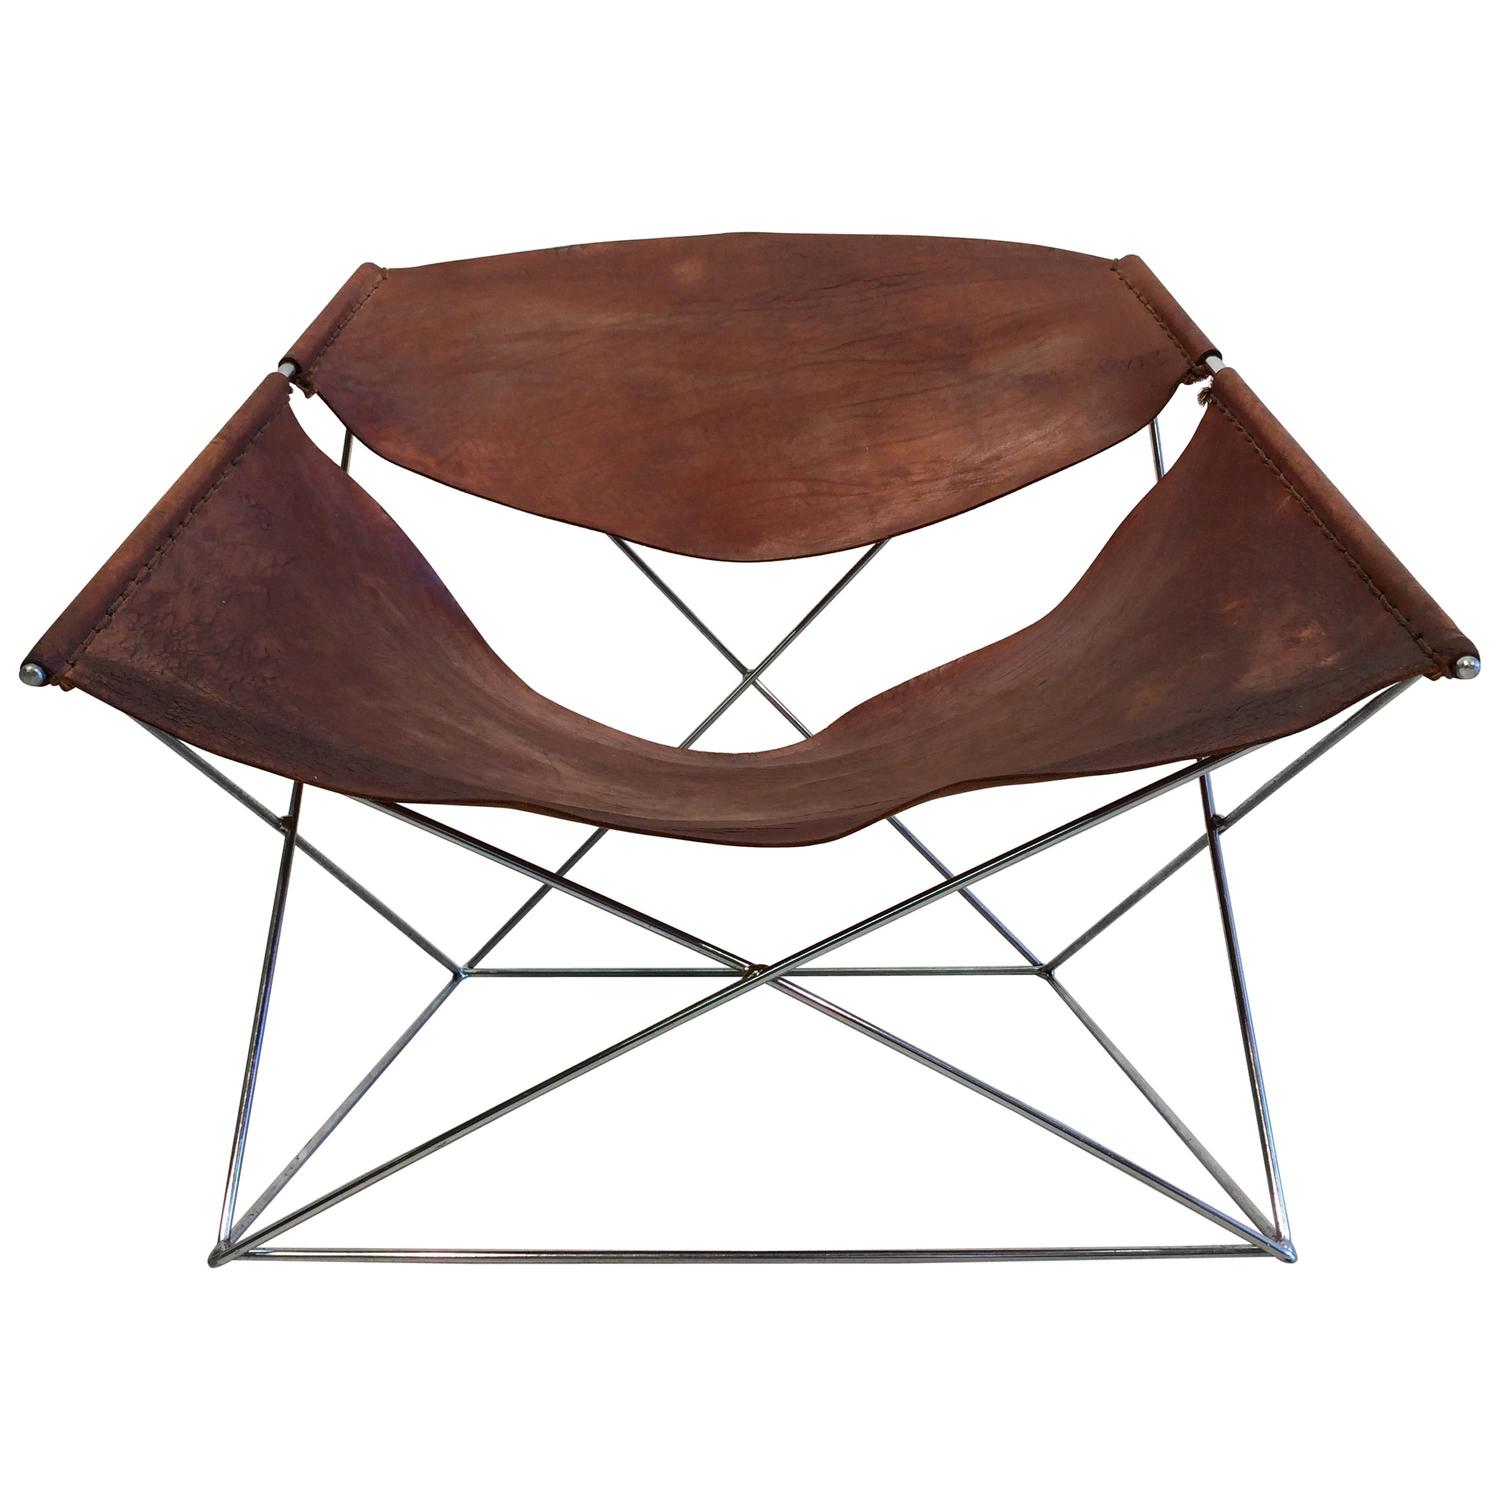 Pierre Paulin Butterfly Chair In Original Patinated Cognac Leather At